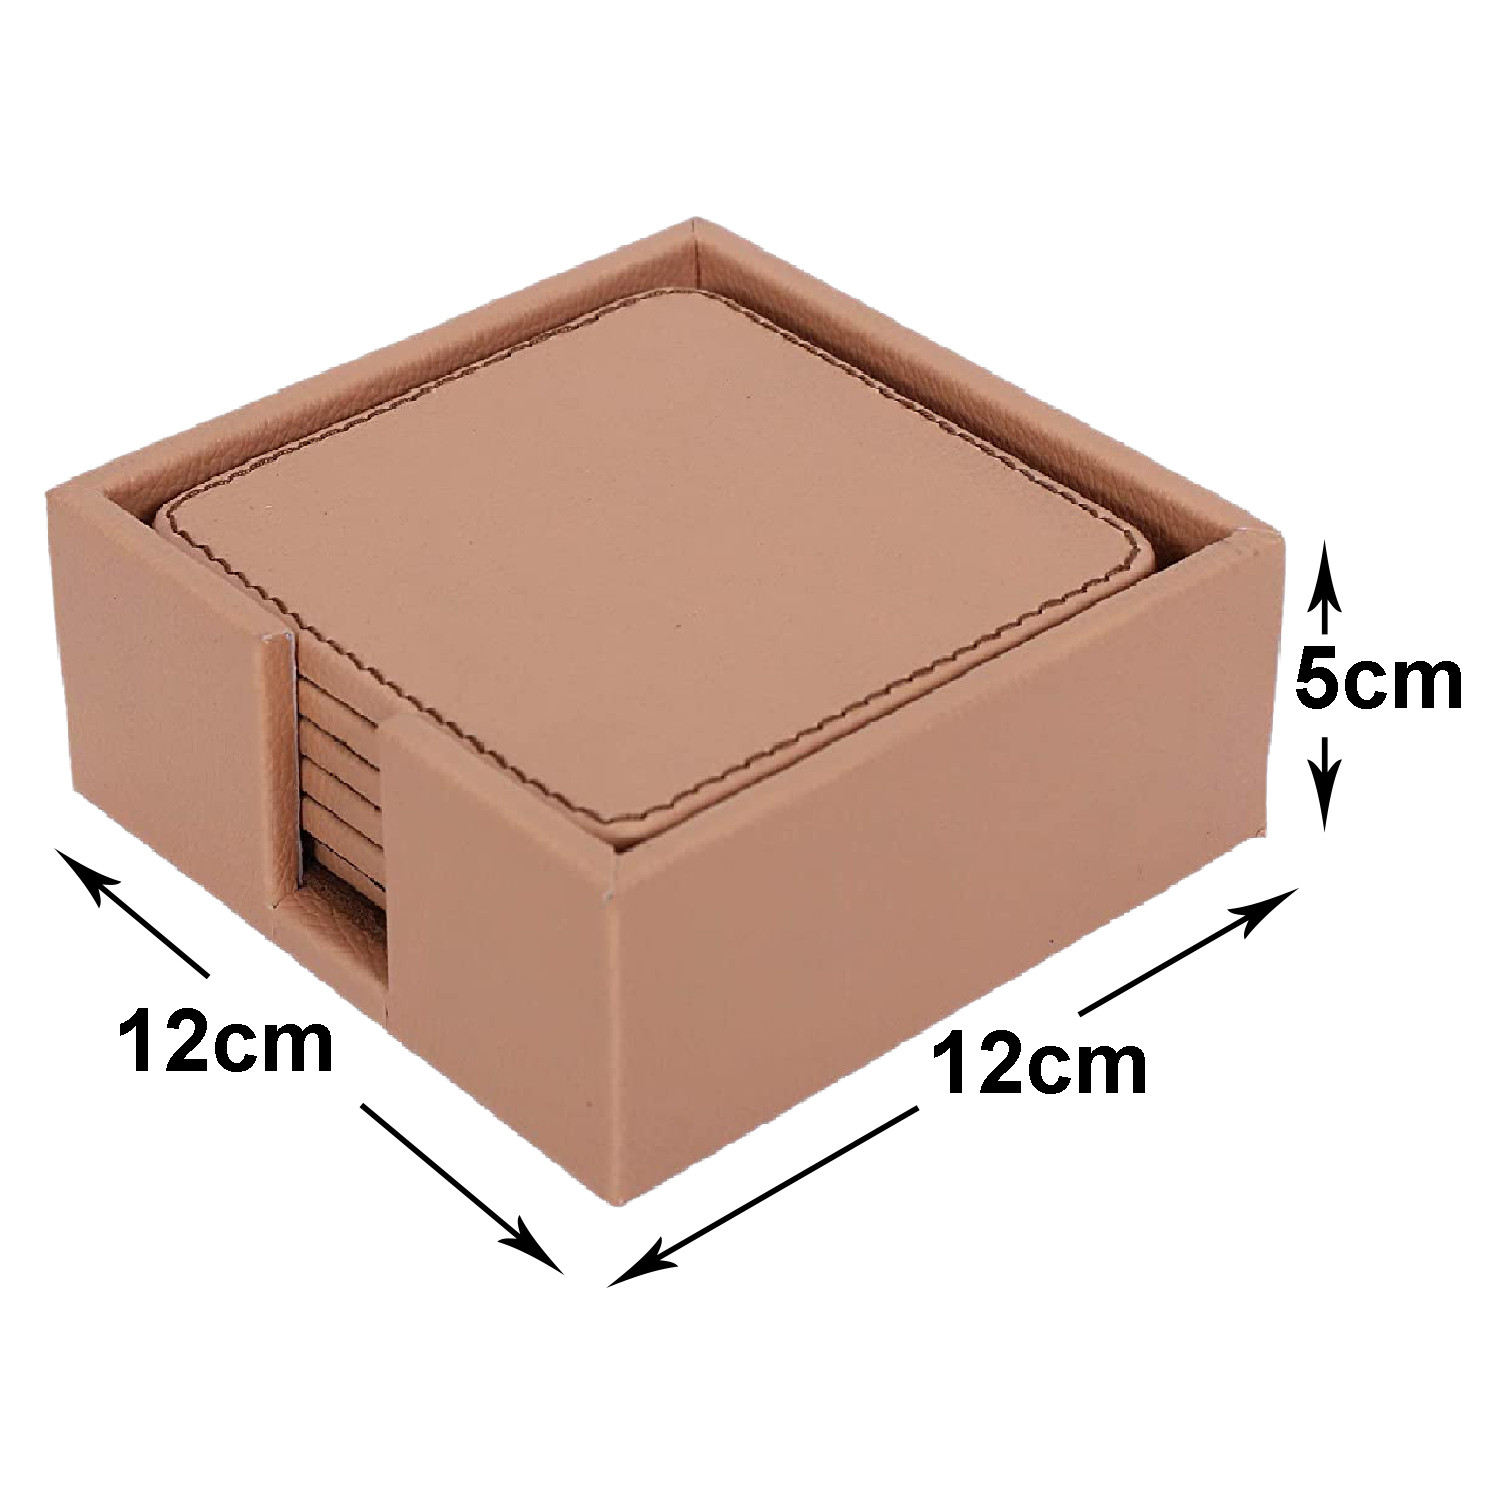 Kuber Industries Tea Coaster|Soft Leather Heat Insulation Tabletop Coasters|Decorative Holder for Tea, Coffee & Office Desk With Stand Set of 6 (Light Brown)